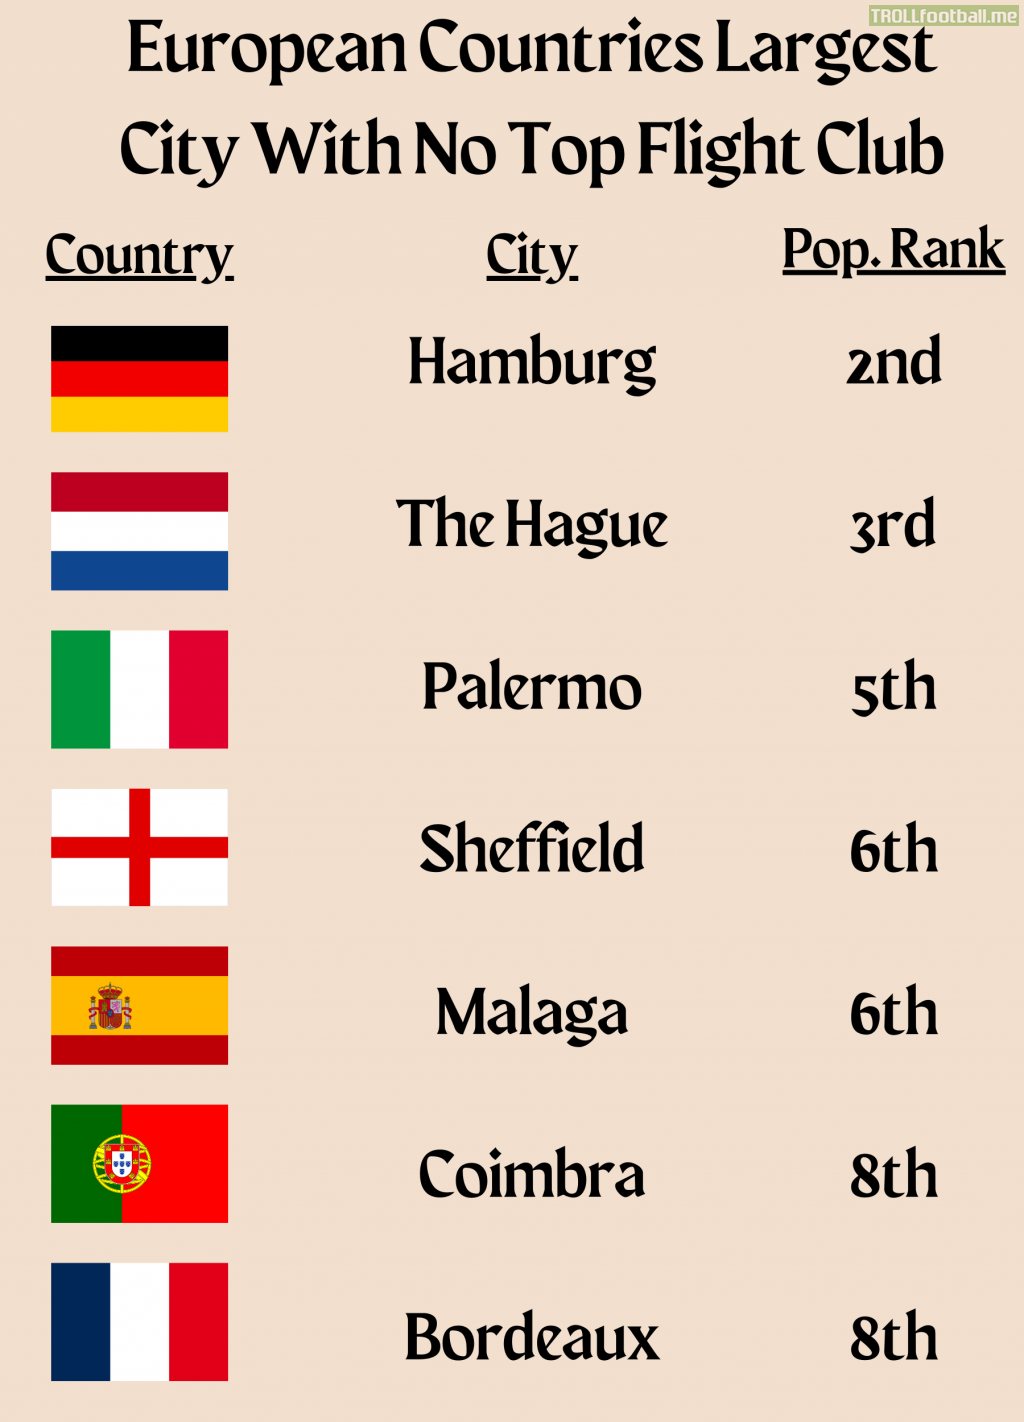 [OC] European Countries Largest City With No Top Flight Club in 2022